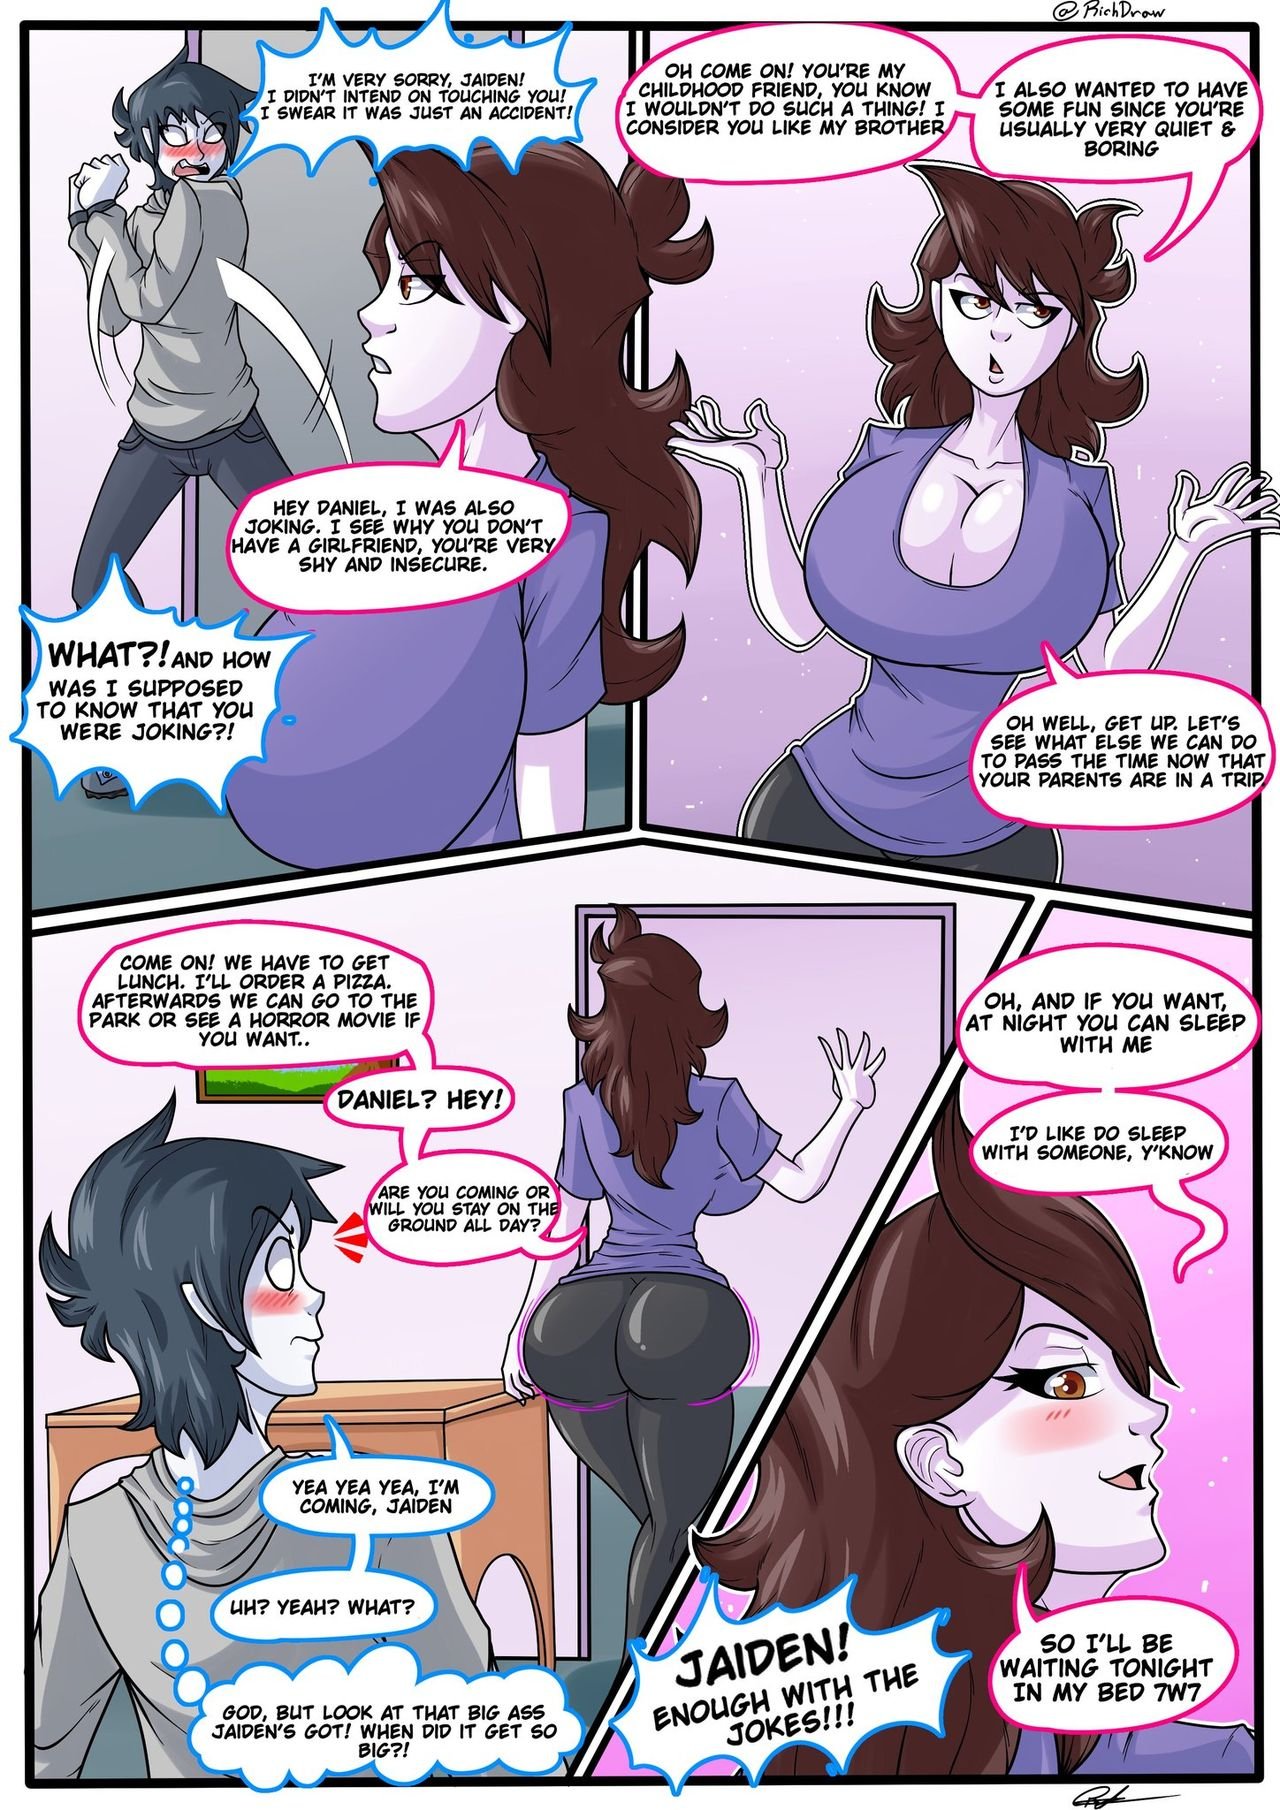 Caring For My Best Friend -Ongoing- comic porn HD Porn Comics photo